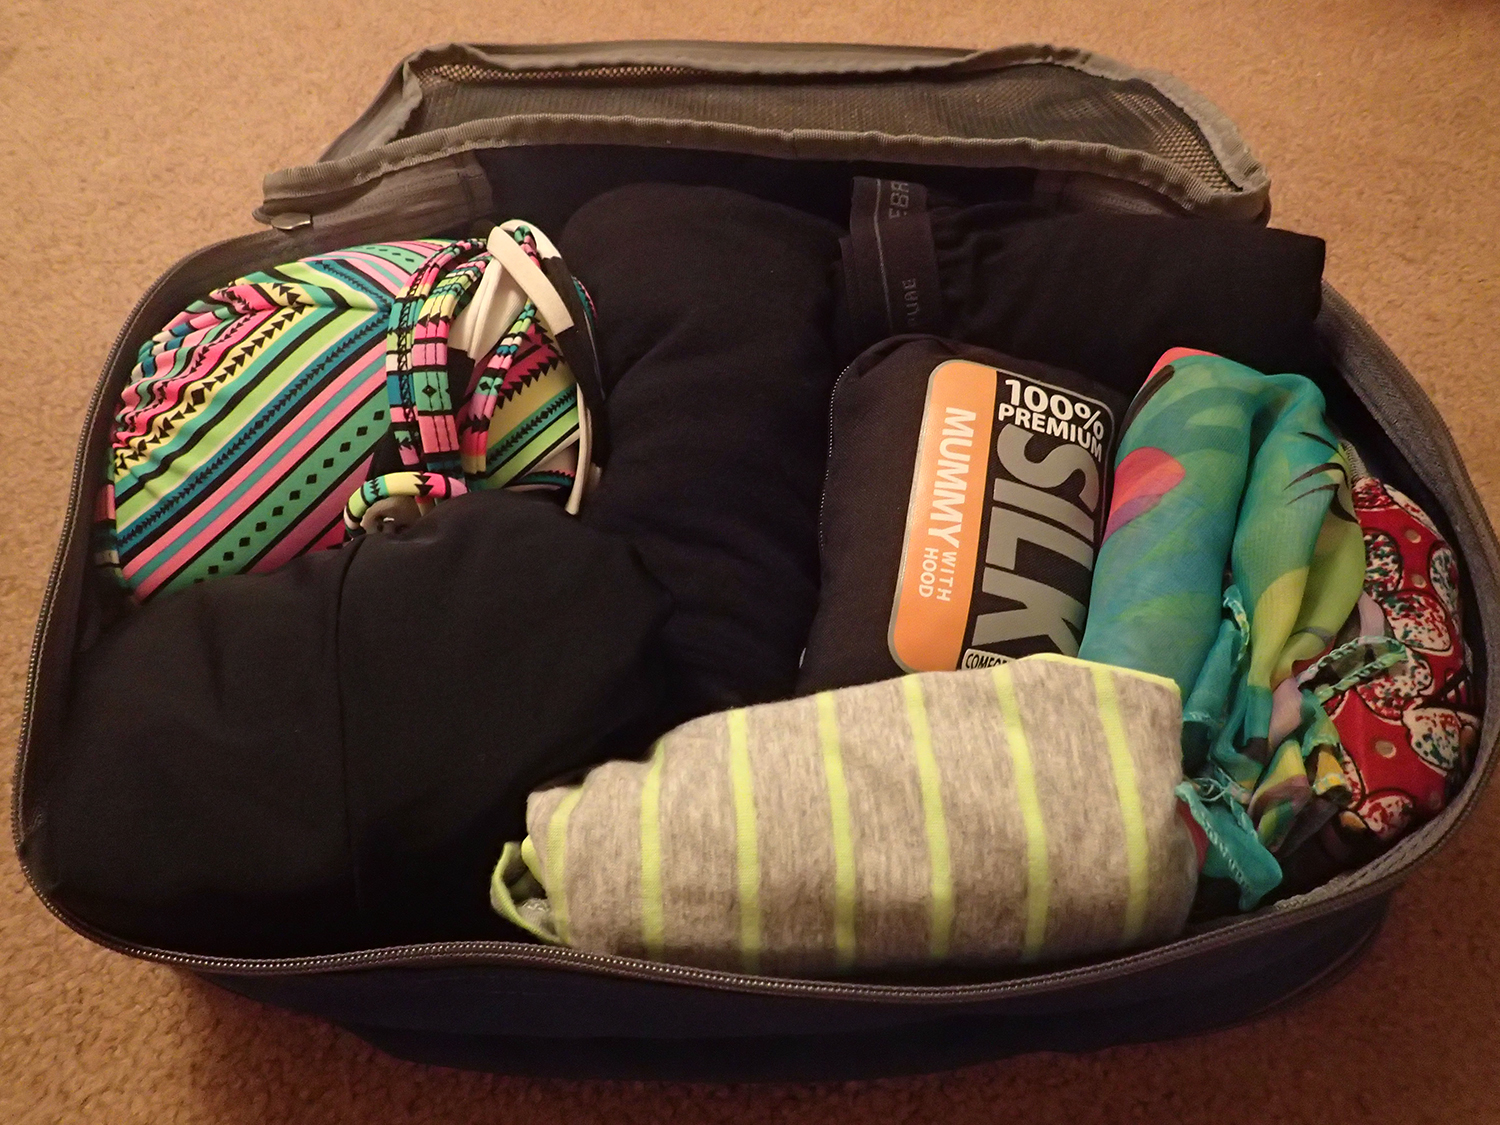 Packing for International Travel with Thirty-One Gifts - yodertoterblog